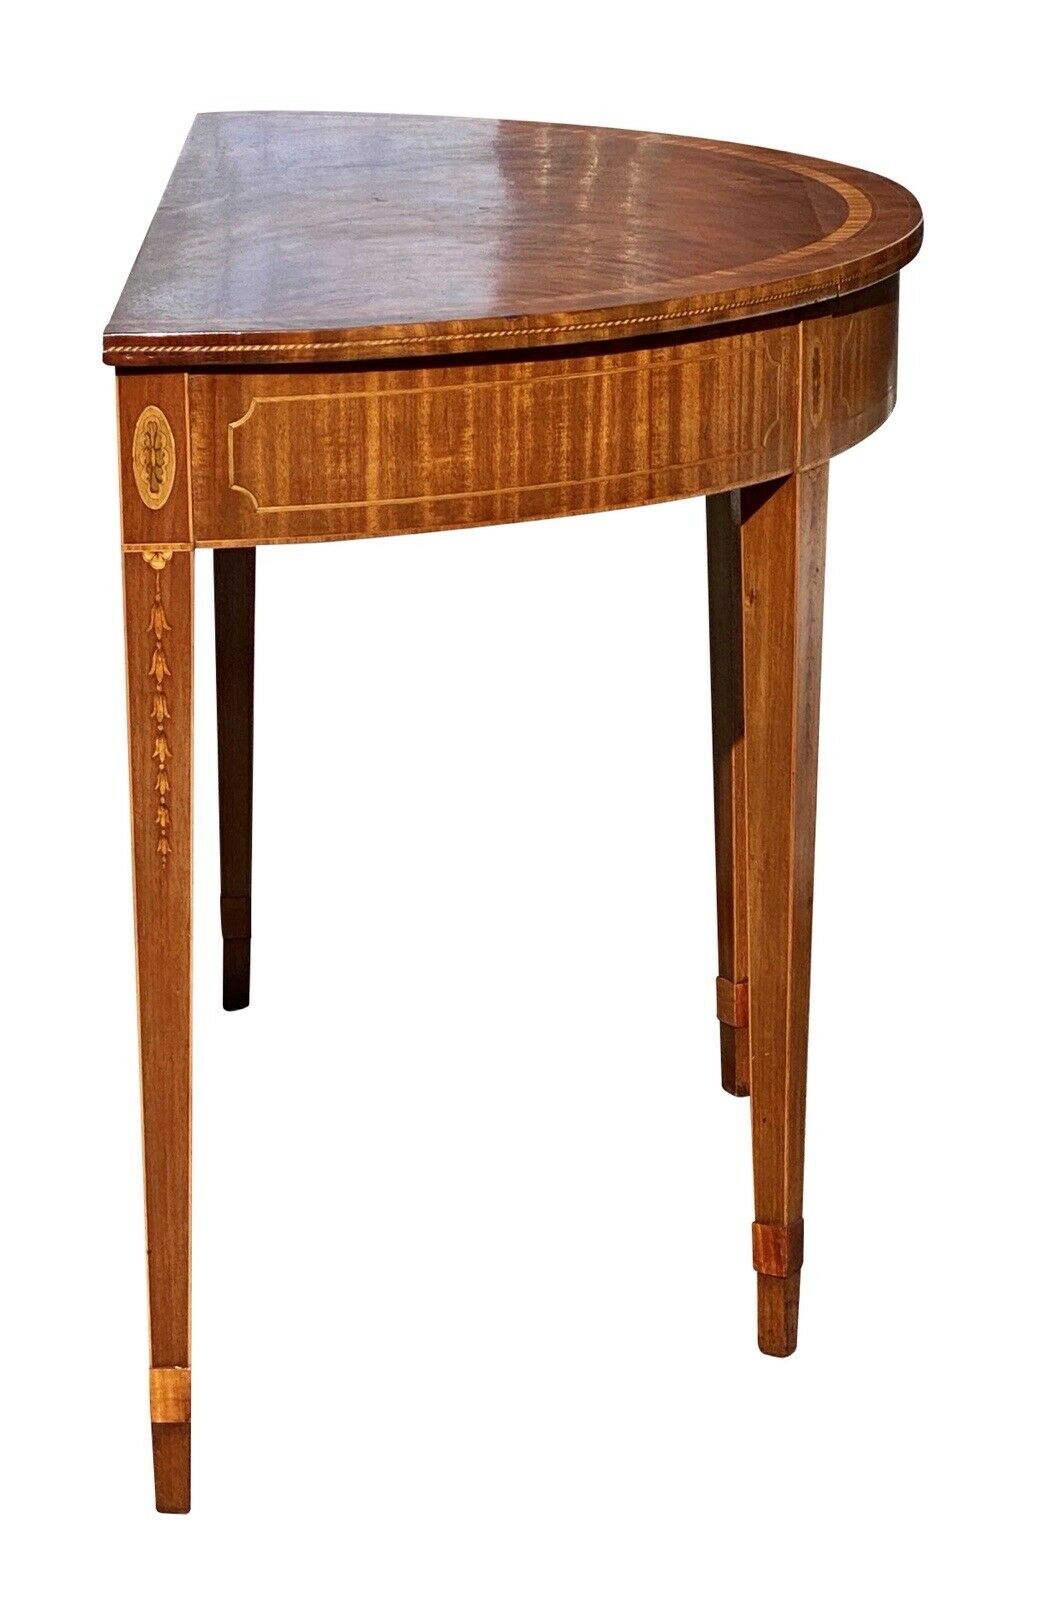 20th C Antique Mahogany Demilune Console Table W/ Satinwood Bellflower Inlays